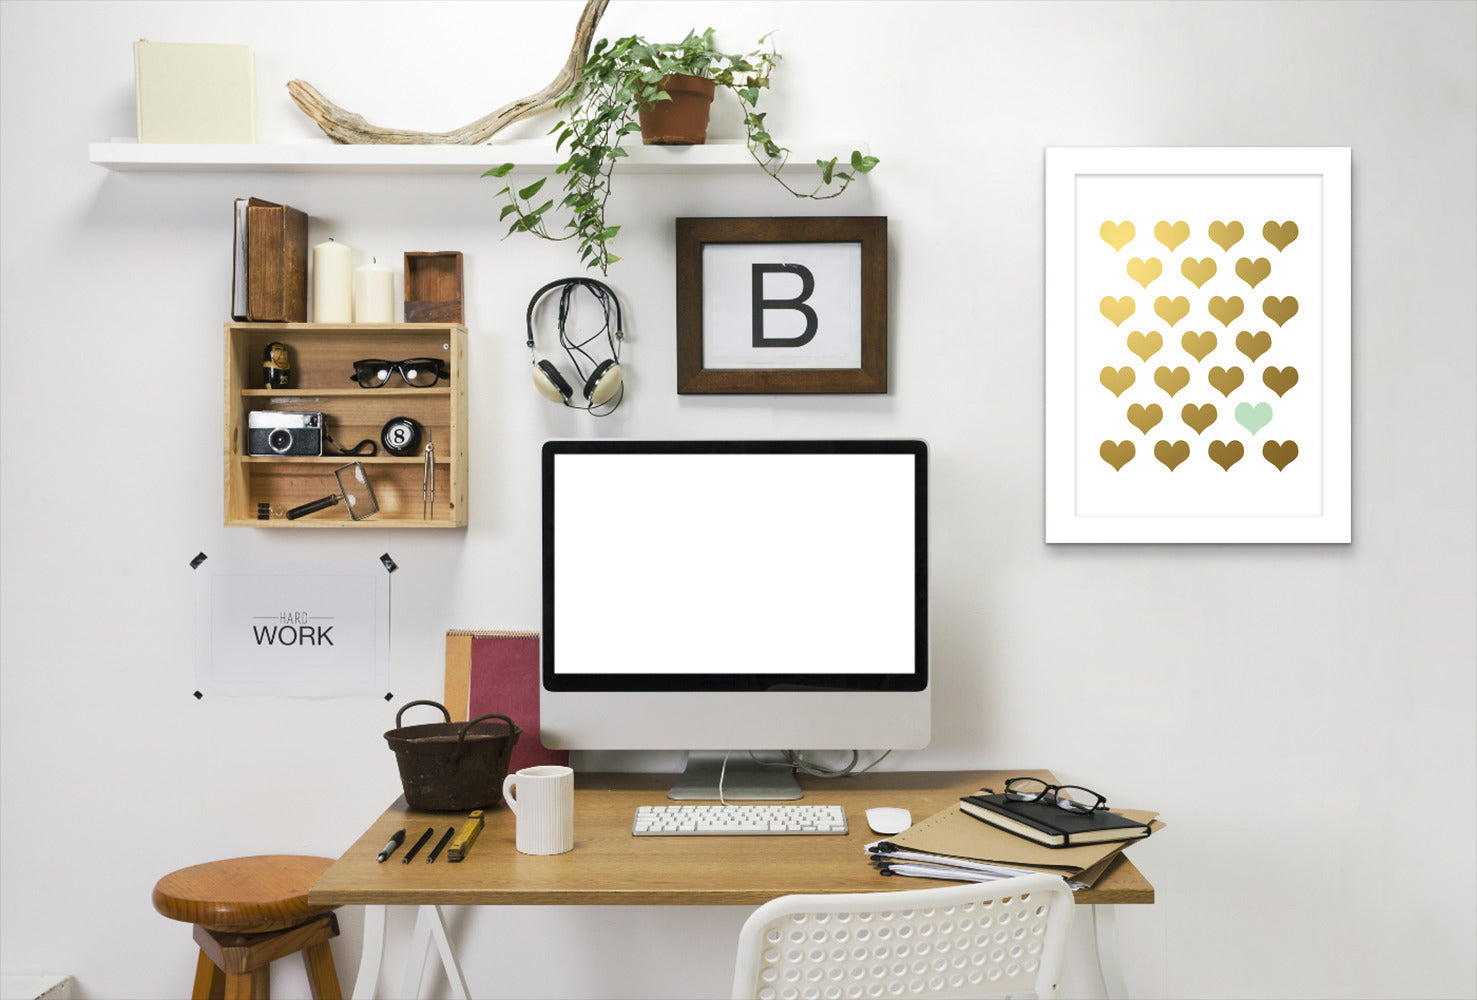 Hearts Gold Mint By Wall + Wonder - White Framed Print - Wall Art - Americanflat